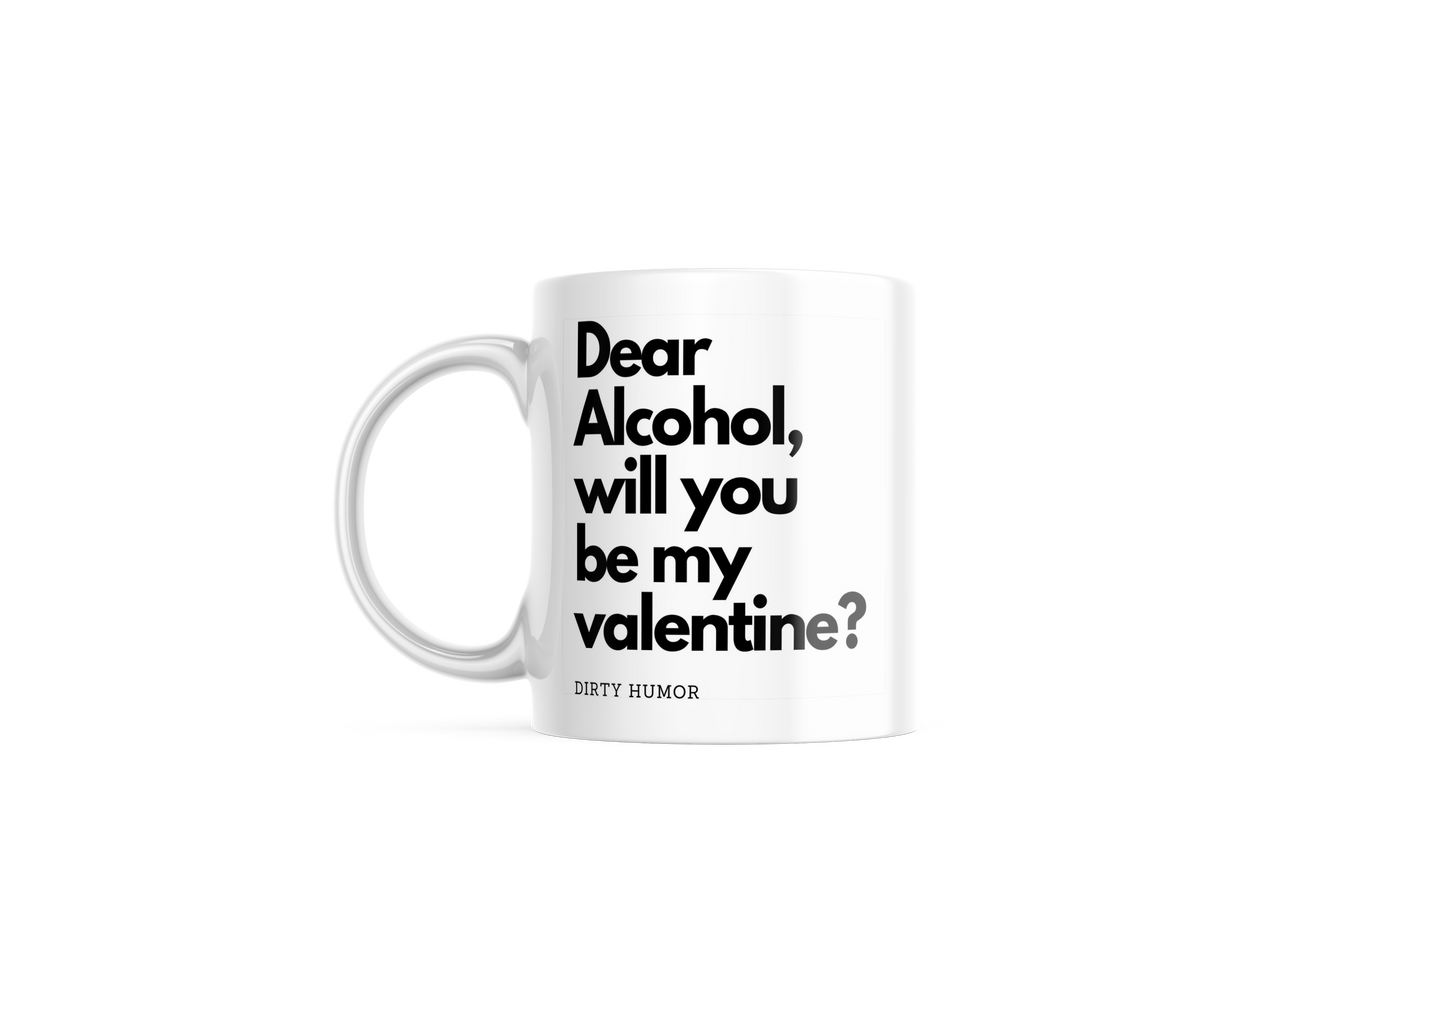 Dear Alcohol, will you be my Valentine?